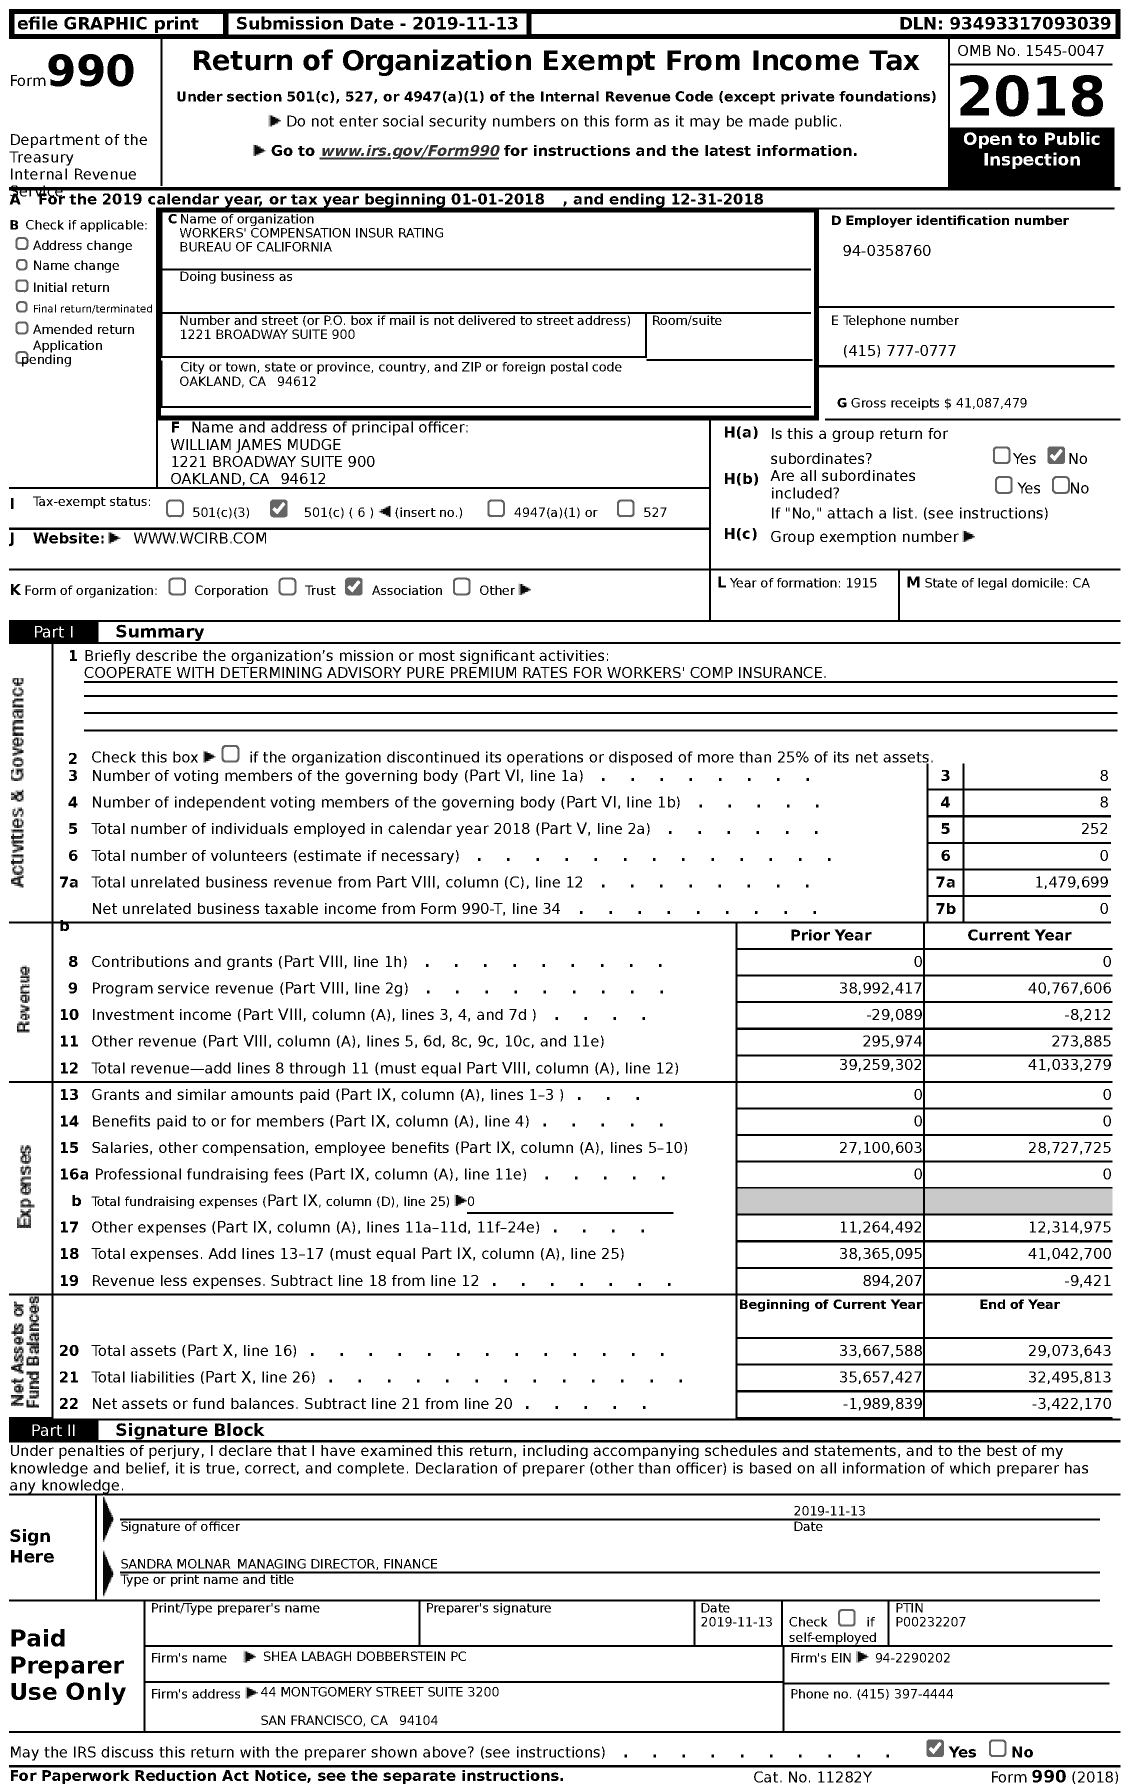 Image of first page of 2018 Form 990 for Workers' Compensation Insur Rating Bureau of California